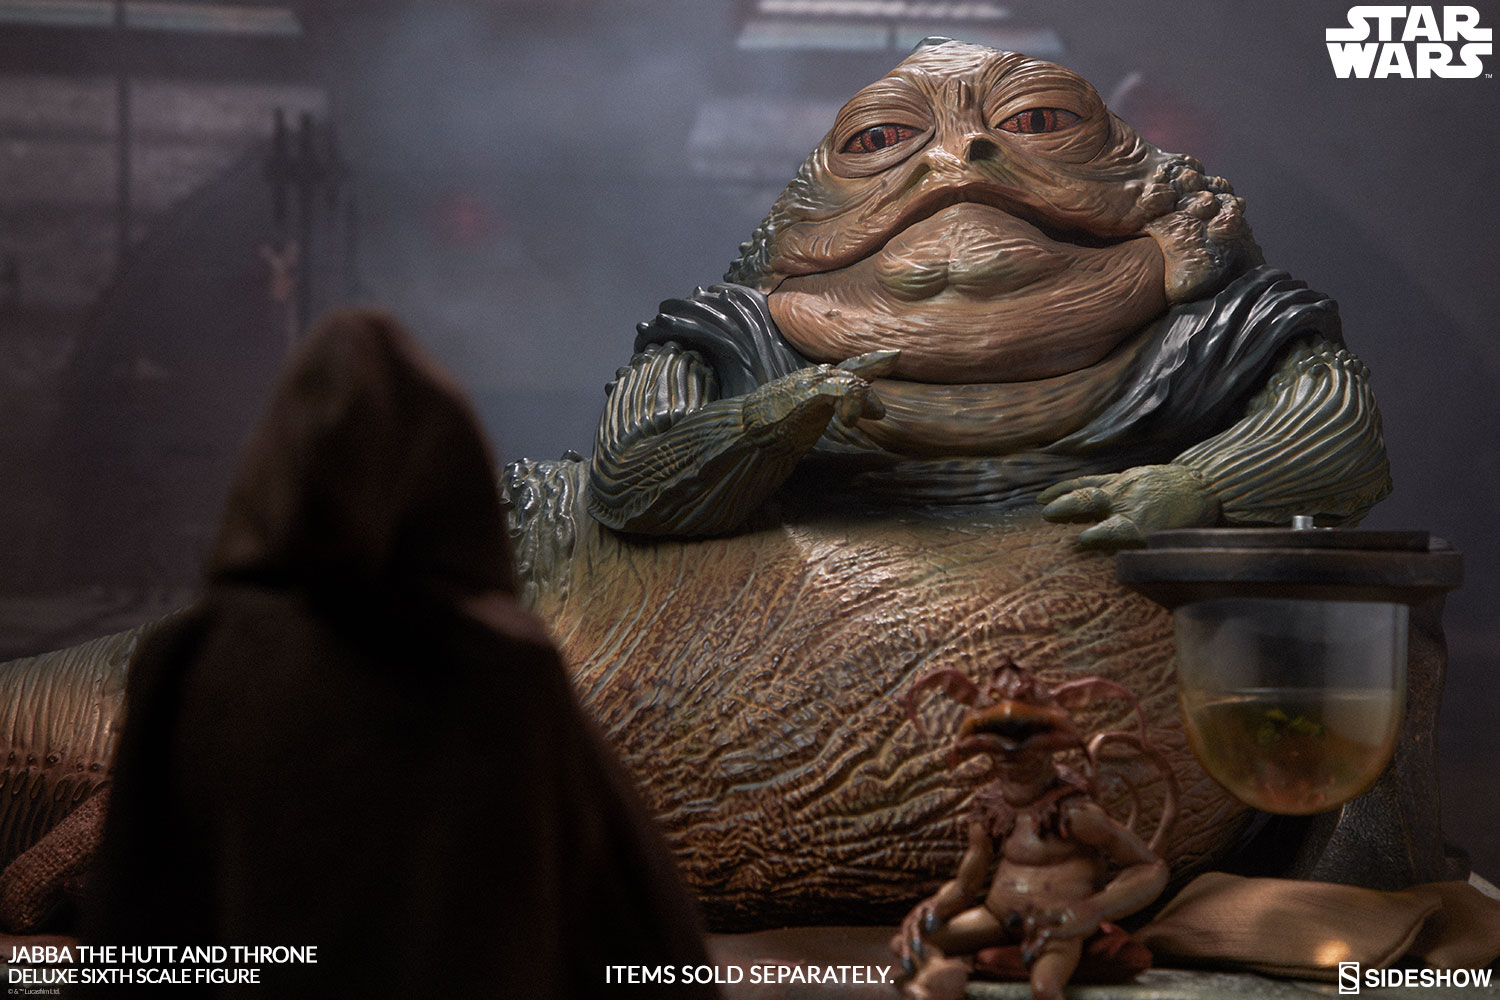 star-wars-jabba-the-hutt-and-throne-deluxe-sixth-scale-figure-sideshow-100410-04.jpg